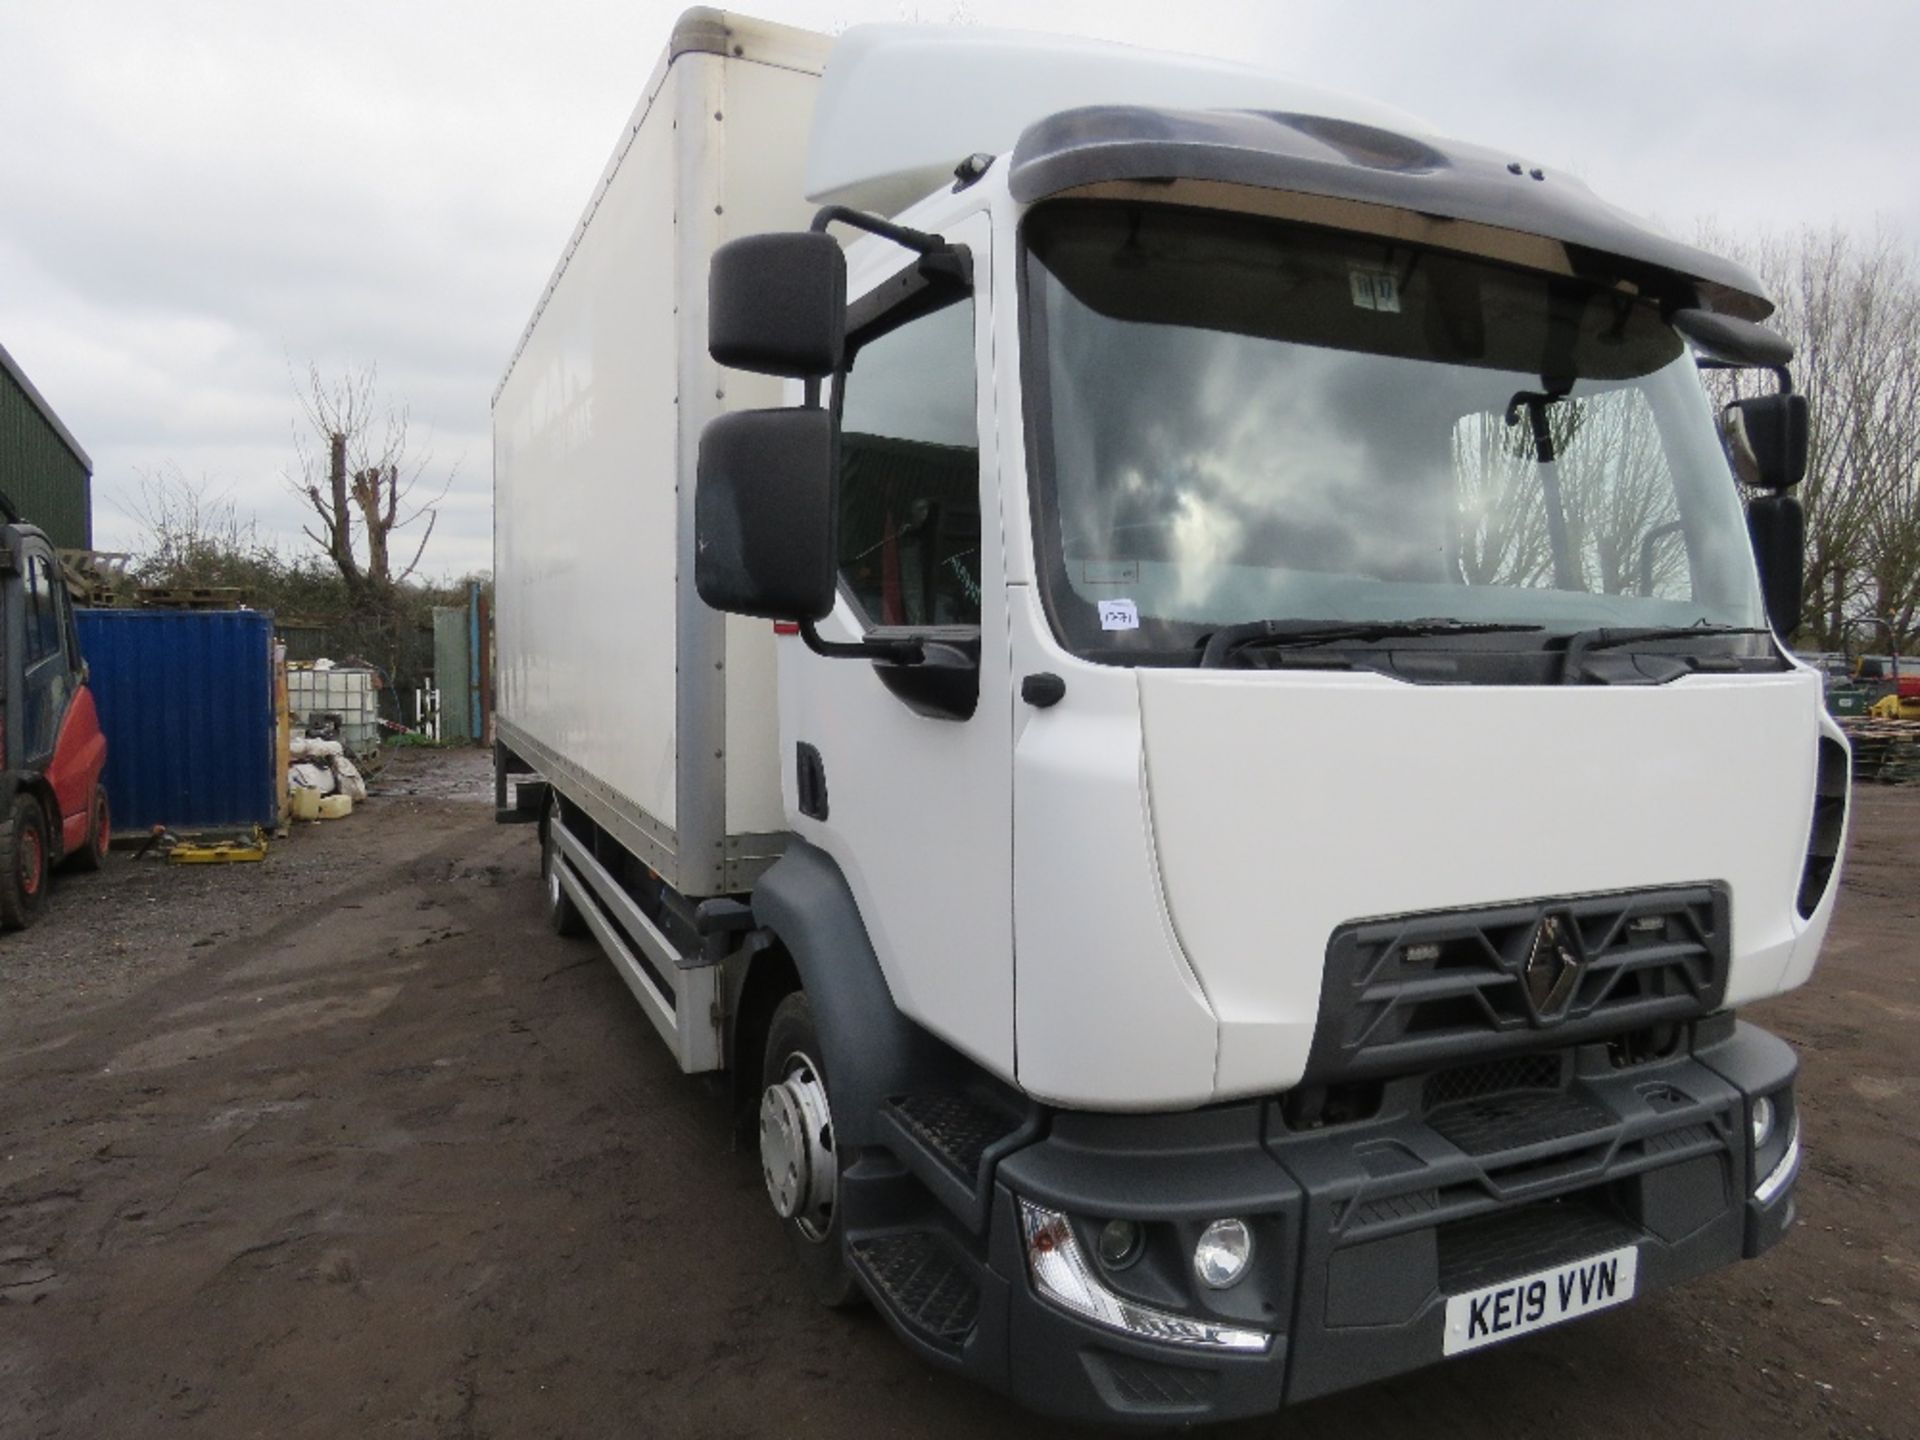 RENAULT D75 BOX LORRY REG:KE19 VVN. 7500KG RATED, DIRECT FROM LOCAL COMPANY WHO ARE SELLING DUE TO A - Image 2 of 16